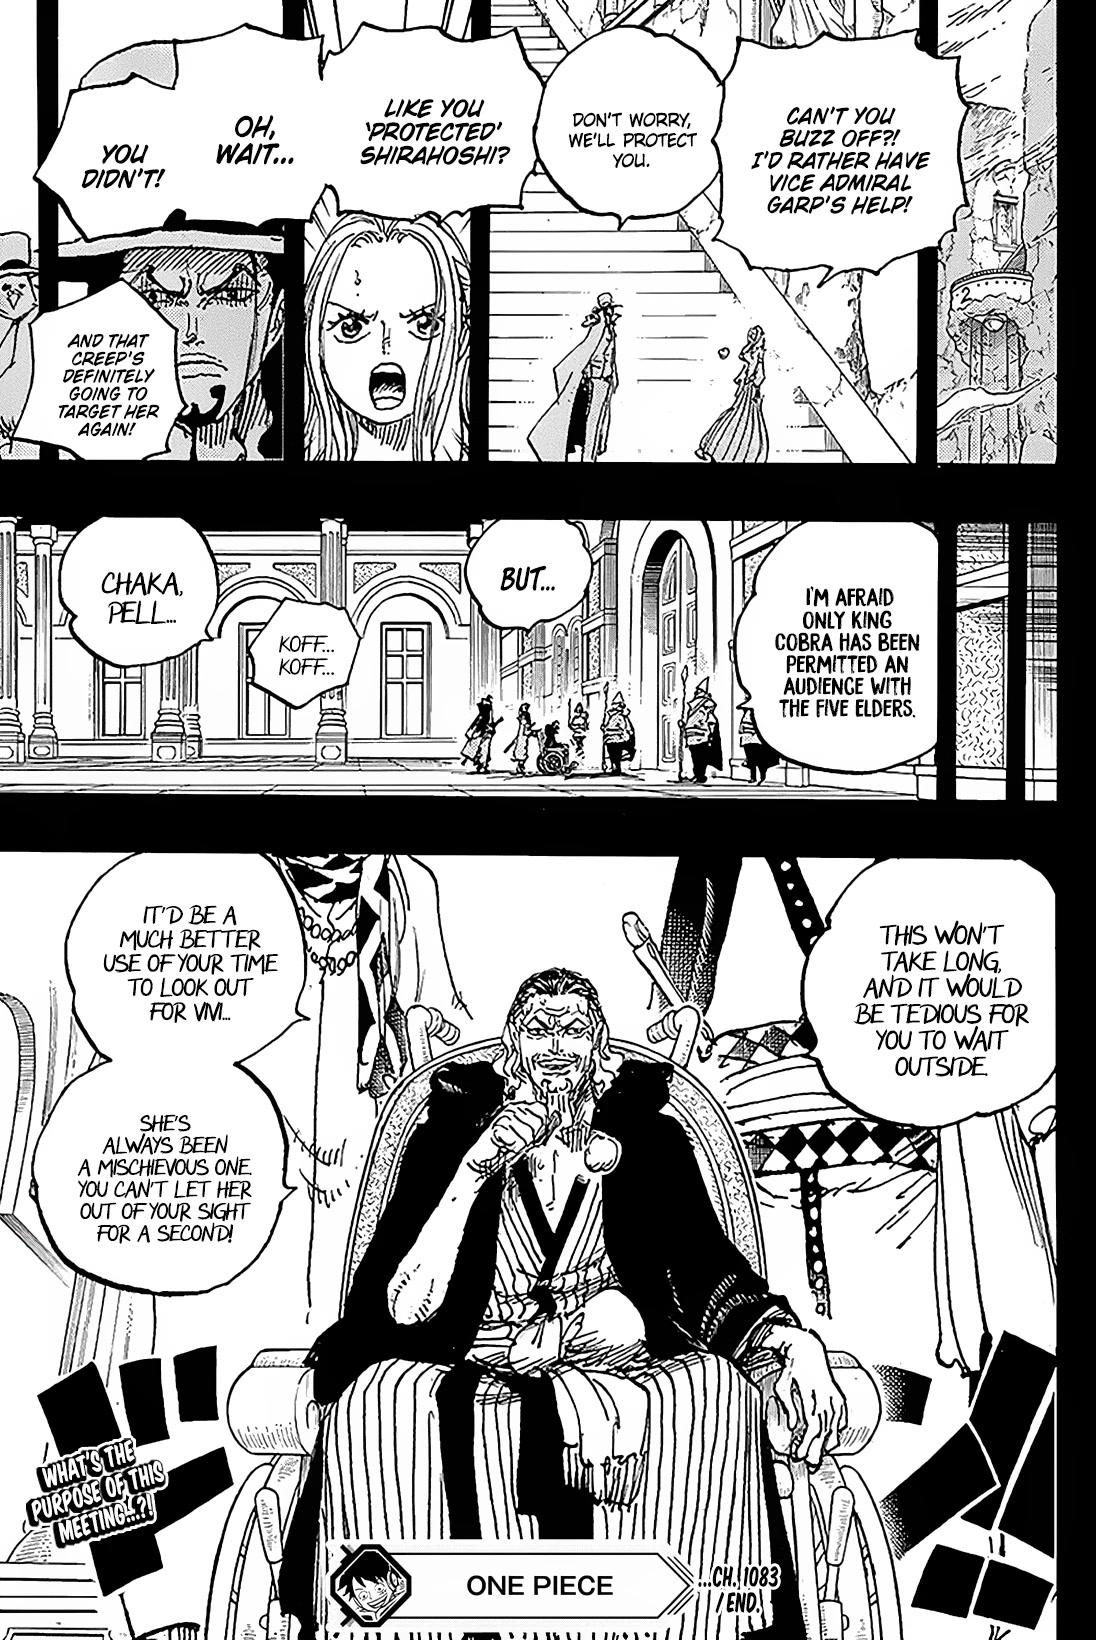 One Piece Chapter 1083: The Truth About That Day page 14 - Mangakakalot